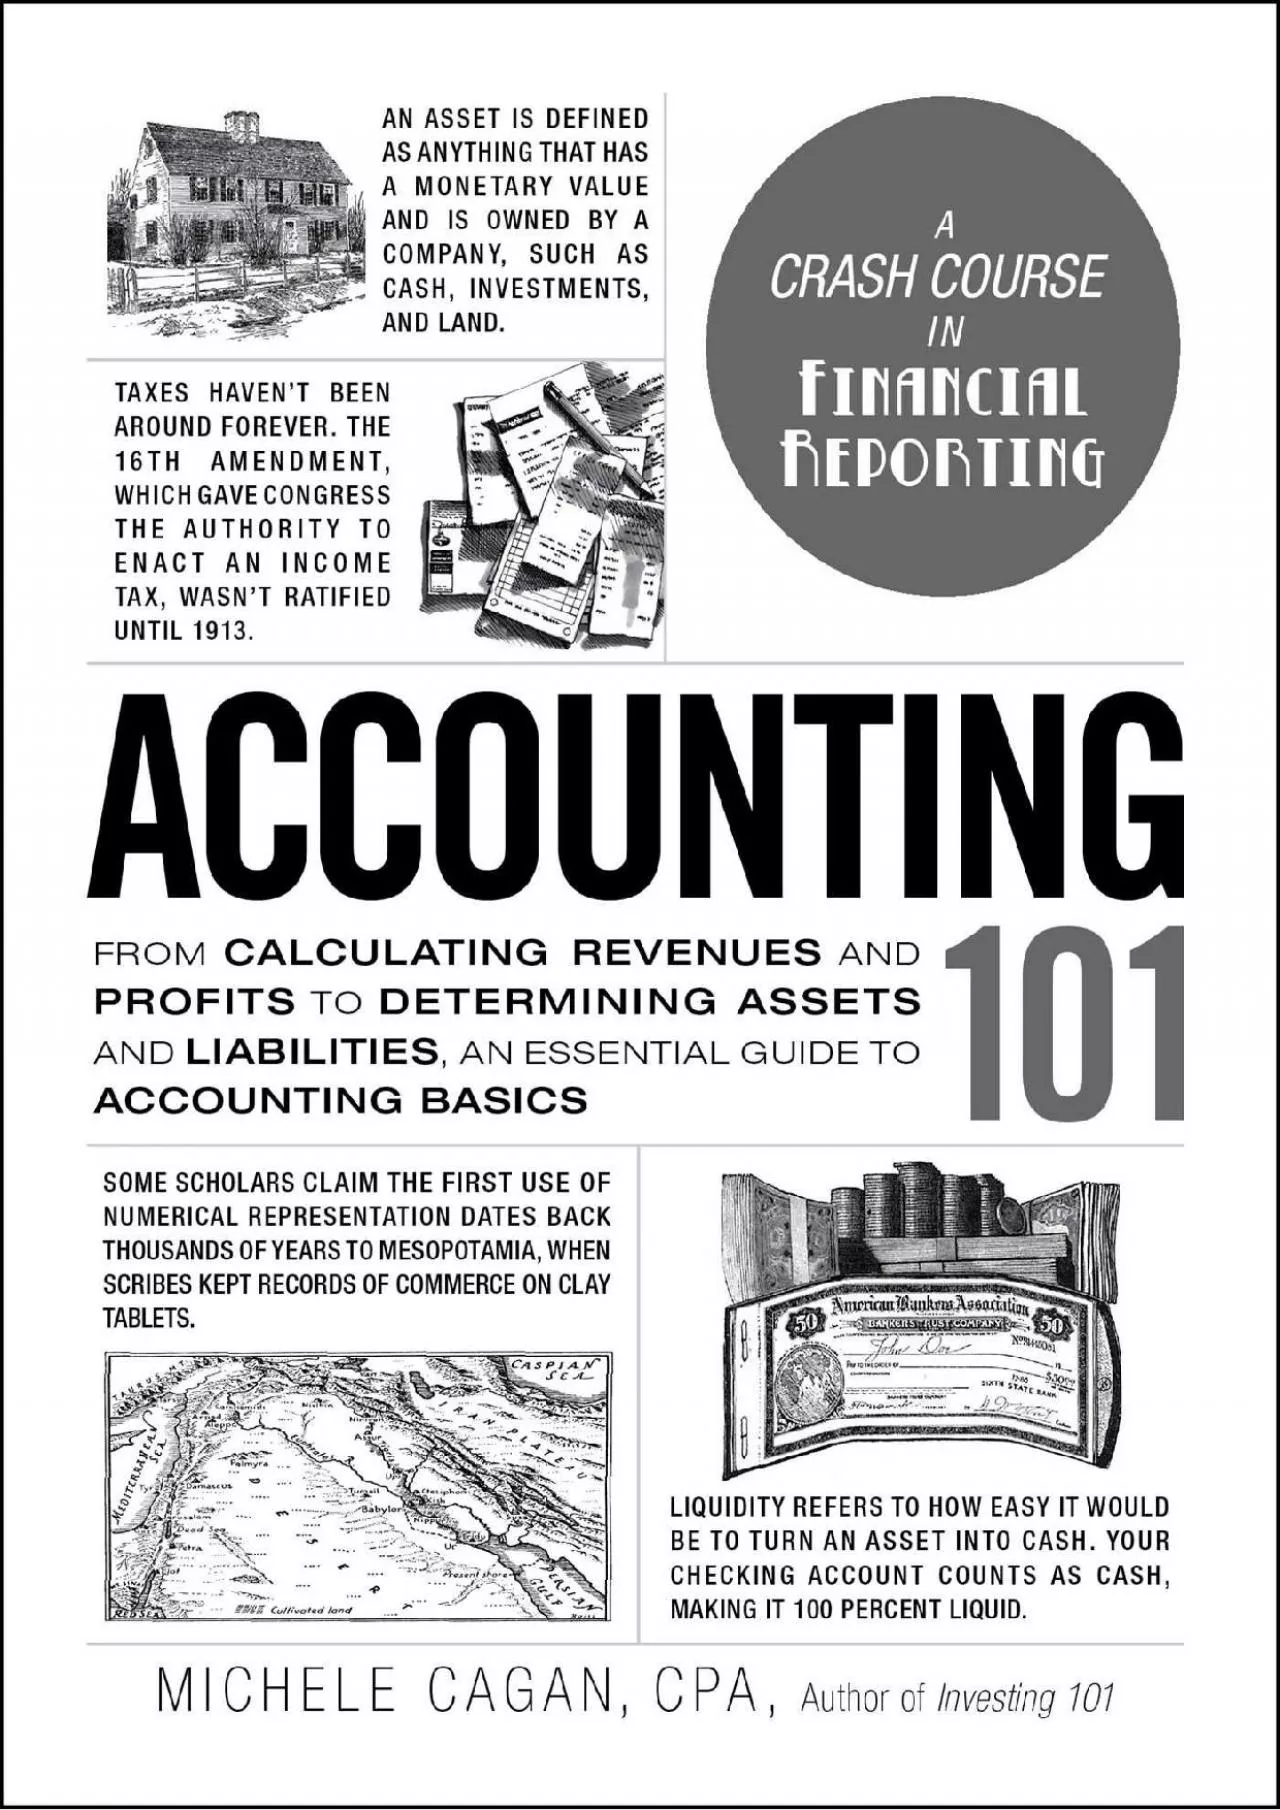 Accounting 101: From Calculating Revenues and Profits to Determining Assets and Liabilities